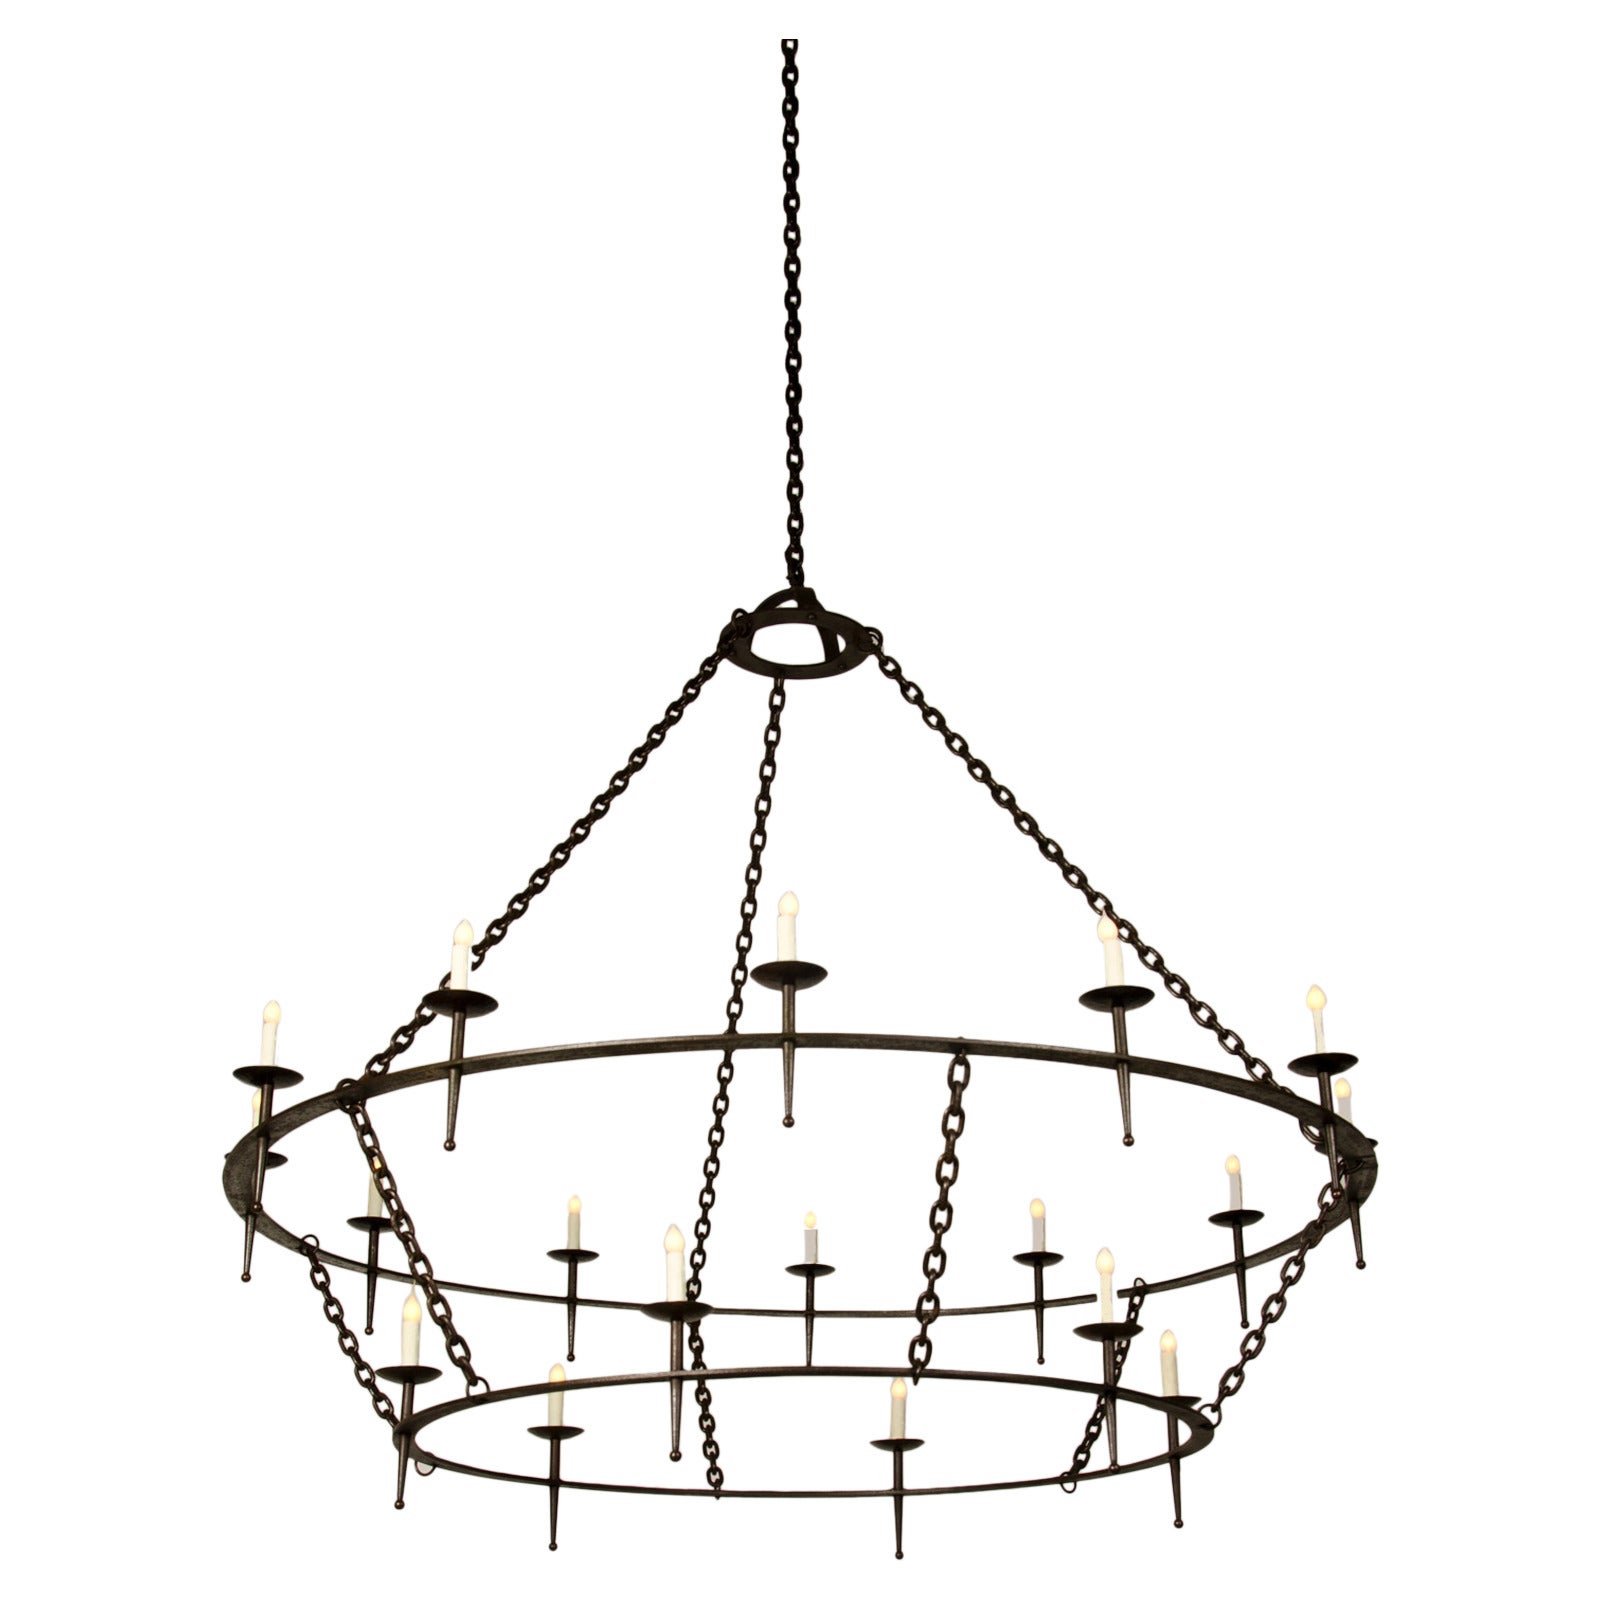 Two-Tier Iron Chandelier, France circa 1920